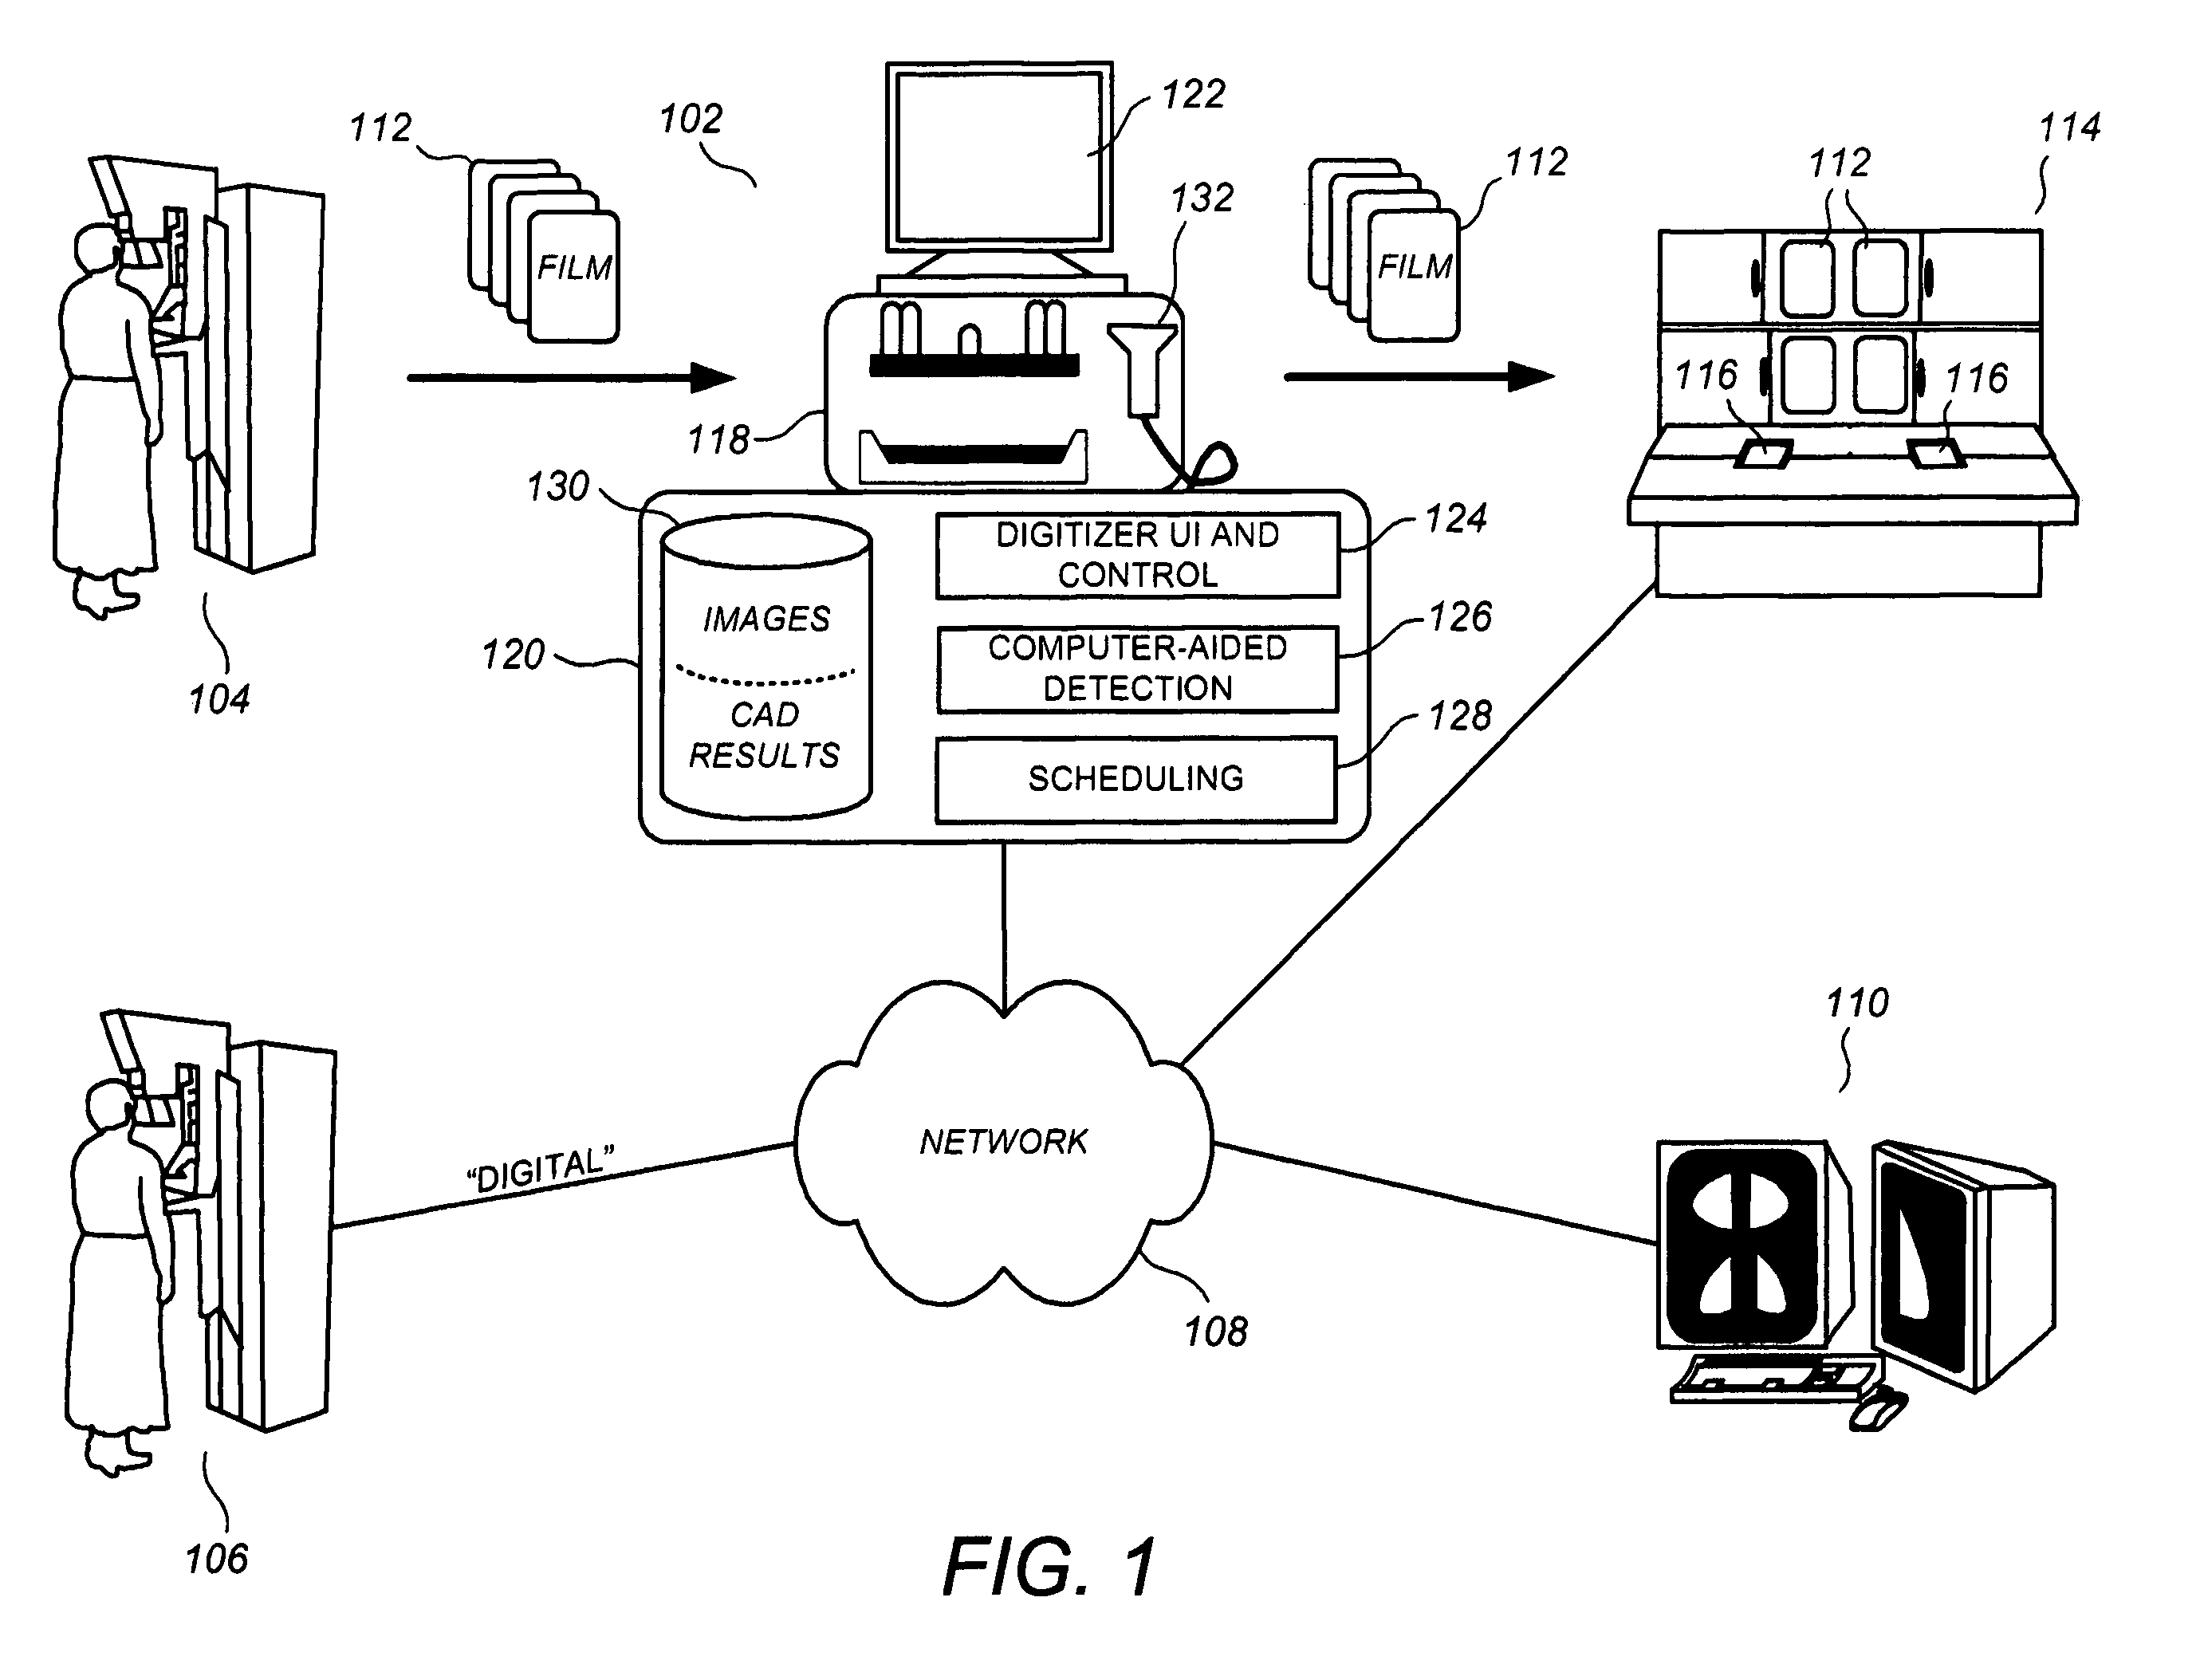 Monitoring and control of mammographic computer-aided detection processing